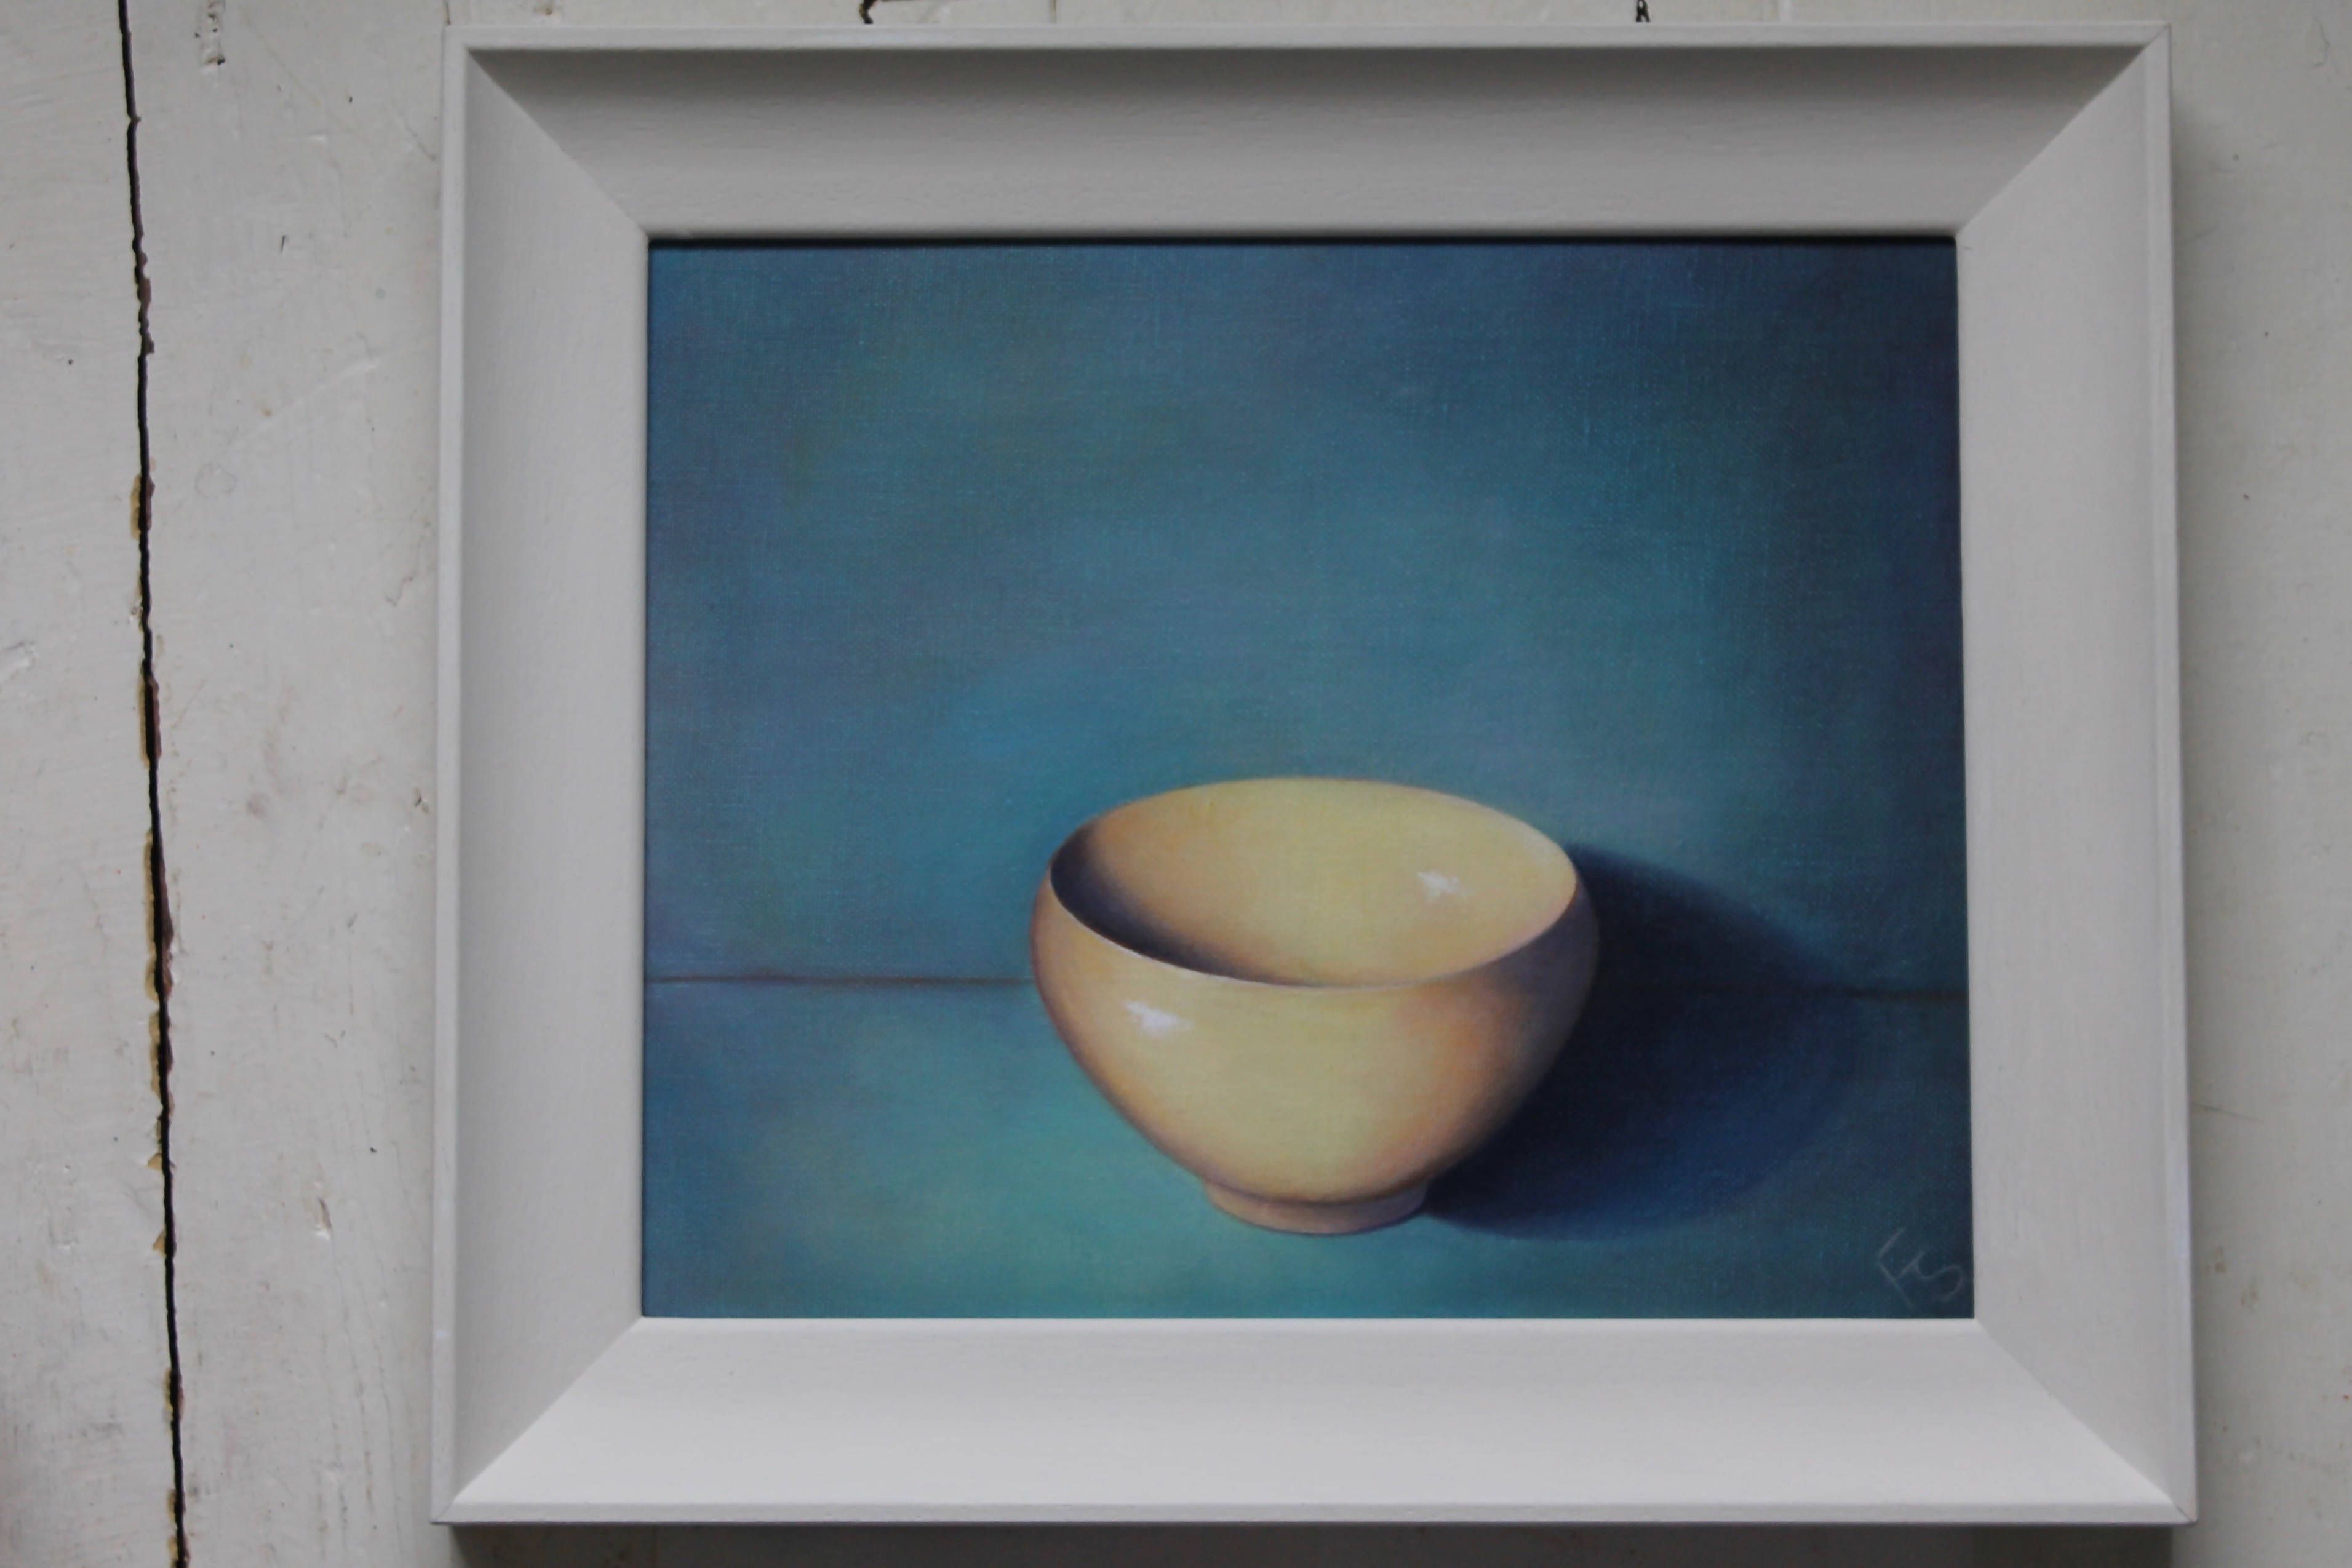 Offering Bowl 1 by Fiona Smith - Secondary Image